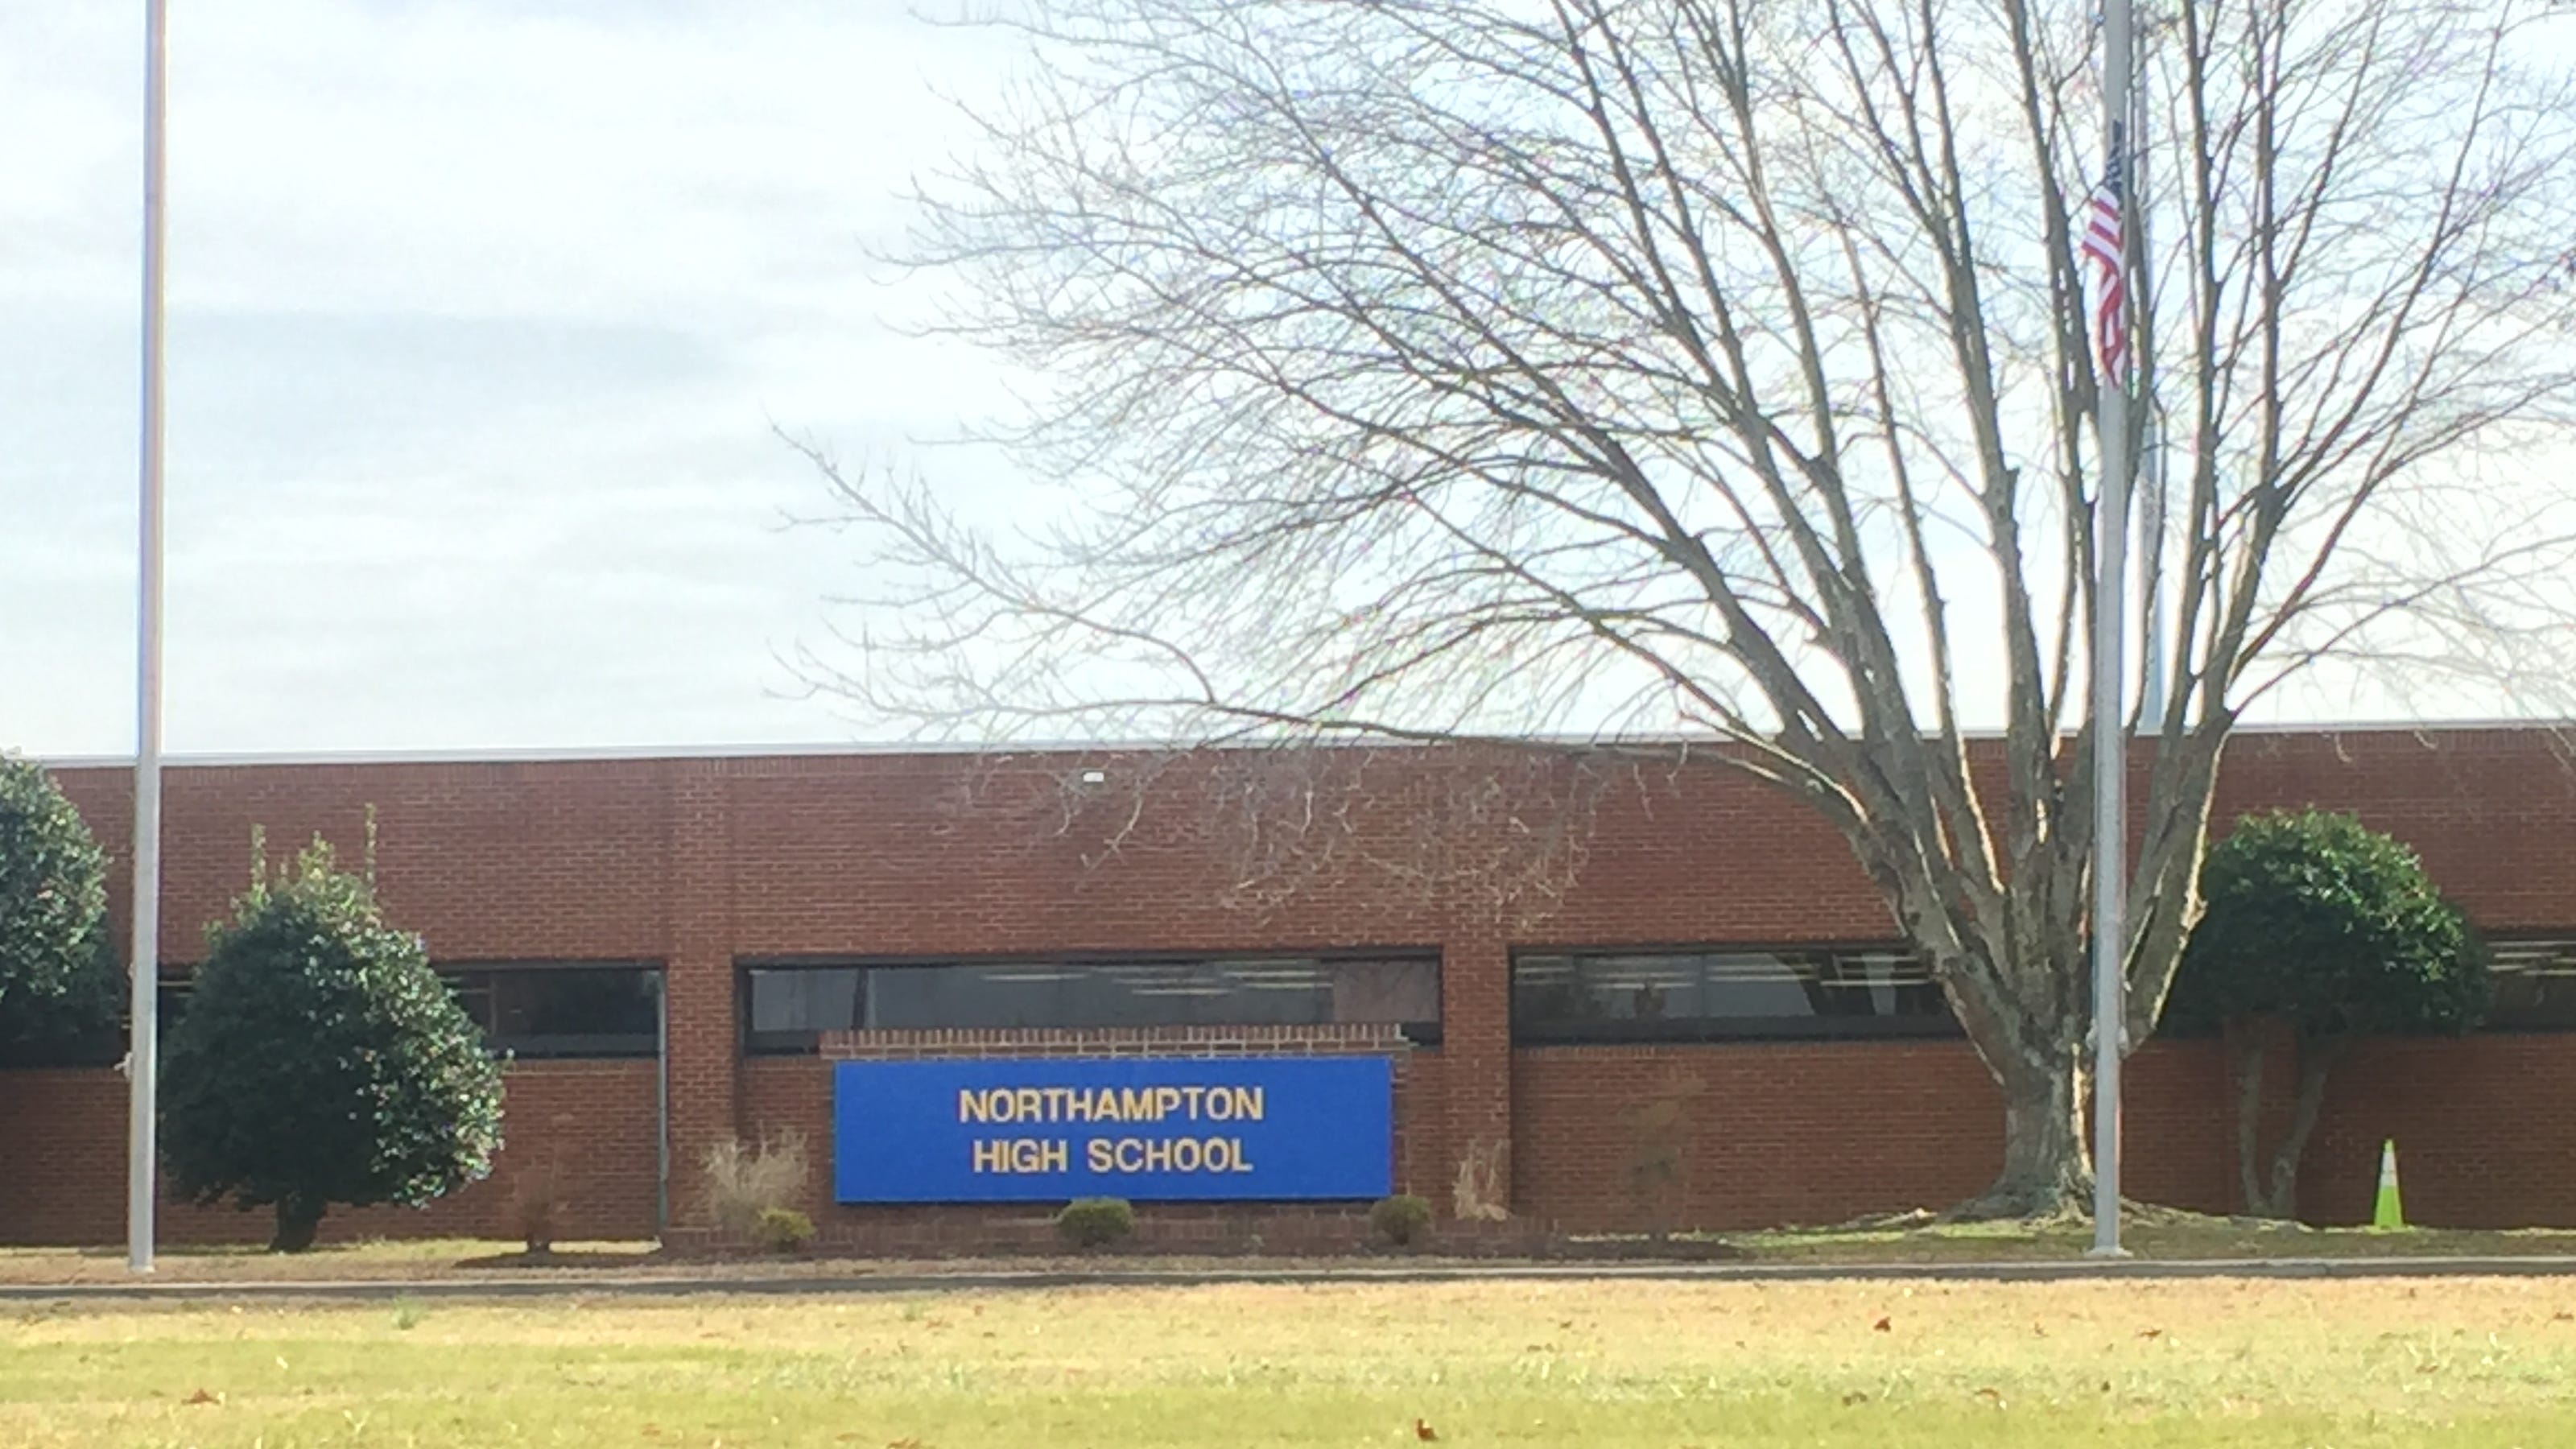  Two Northampton High School students test positive for COVID-19 